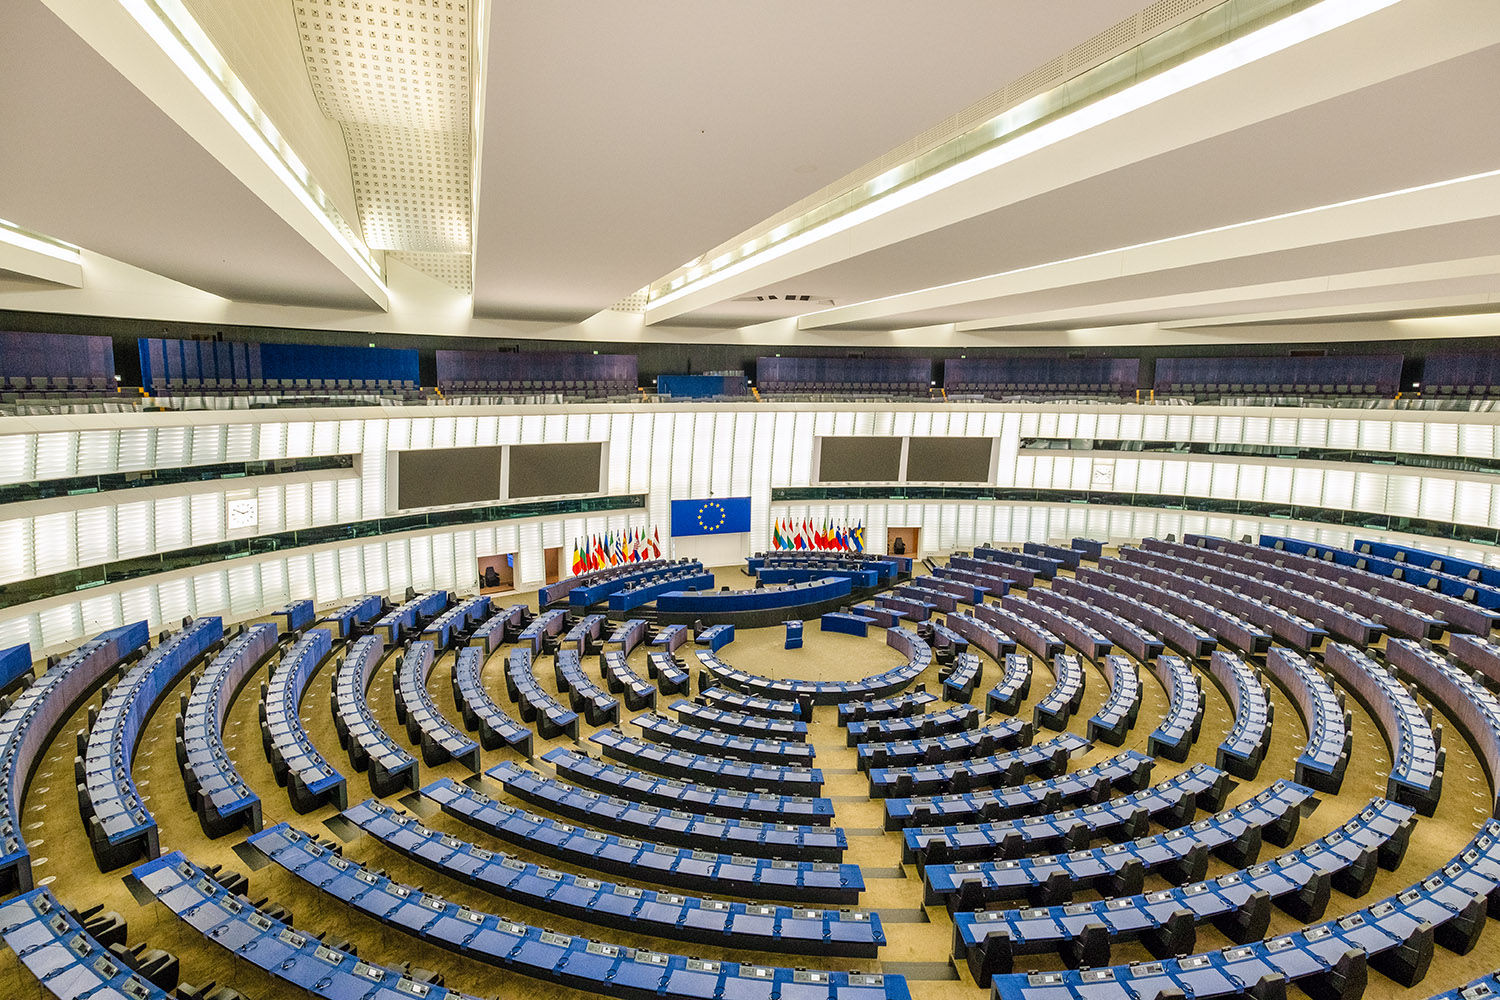 The hemicycle with its more than 800 seats is the second-largest in the world, only topped by one in China